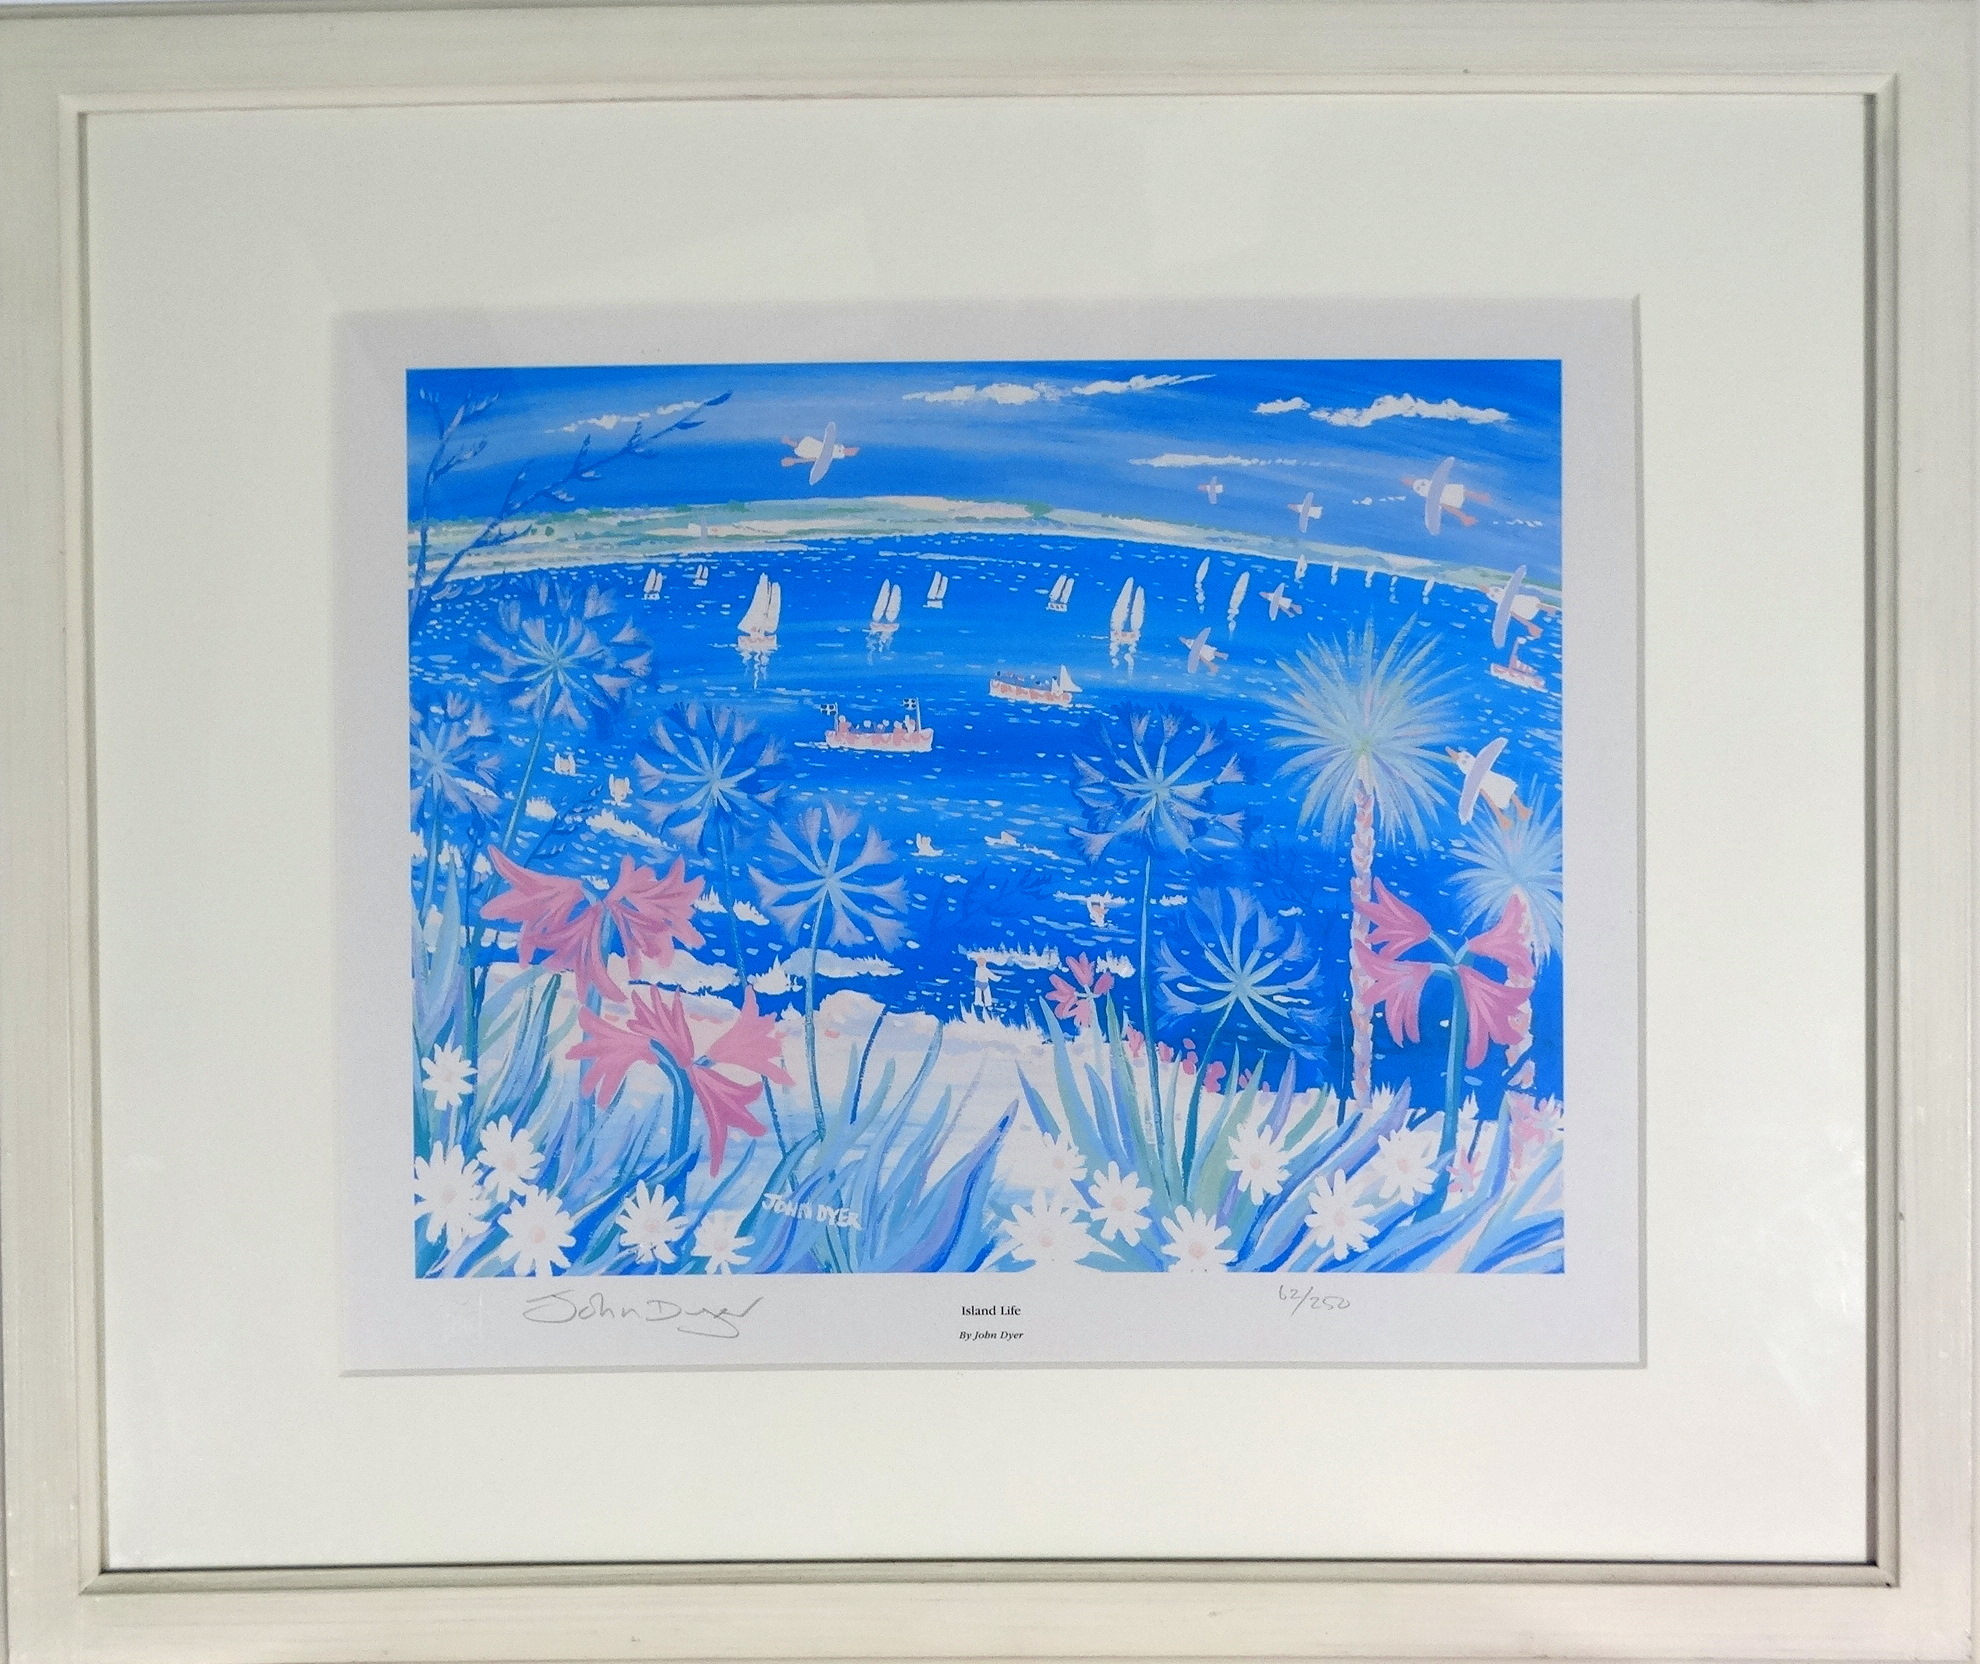 # John DYER (British b.1968) Island Life Lithograph Signed and numbered 62/250 Framed and glazed - Image 4 of 8